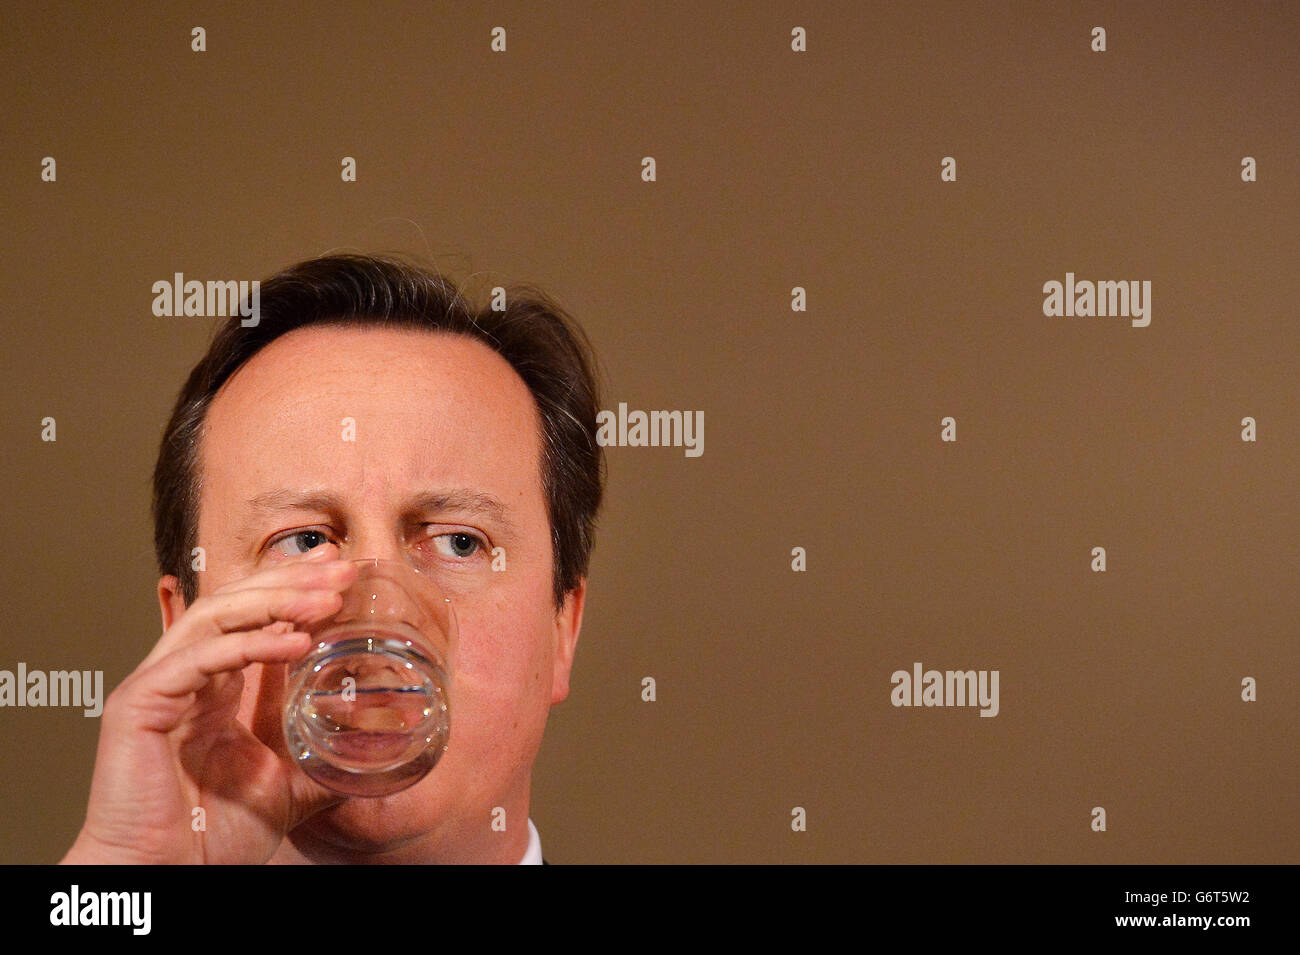 Prime Minister David Cameron pauses to take a drink as he addresses the media during a press conference in 10 Downing Street, London, where he promised that 'money is no object' in providing relief to communities affected by floods, as he warned that the country faces 'a long haul' to recover from the devastation of recent weeks. PRESS ASSOCIATION Photo. Picture date: Tuesday February 11, 2014. Fresh from a two-day tour of inundated communities in South-West England and the Thames Valley, the Prime Minister announced he was cancelling a planned trip to the Middle East to take personal charge Stock Photo